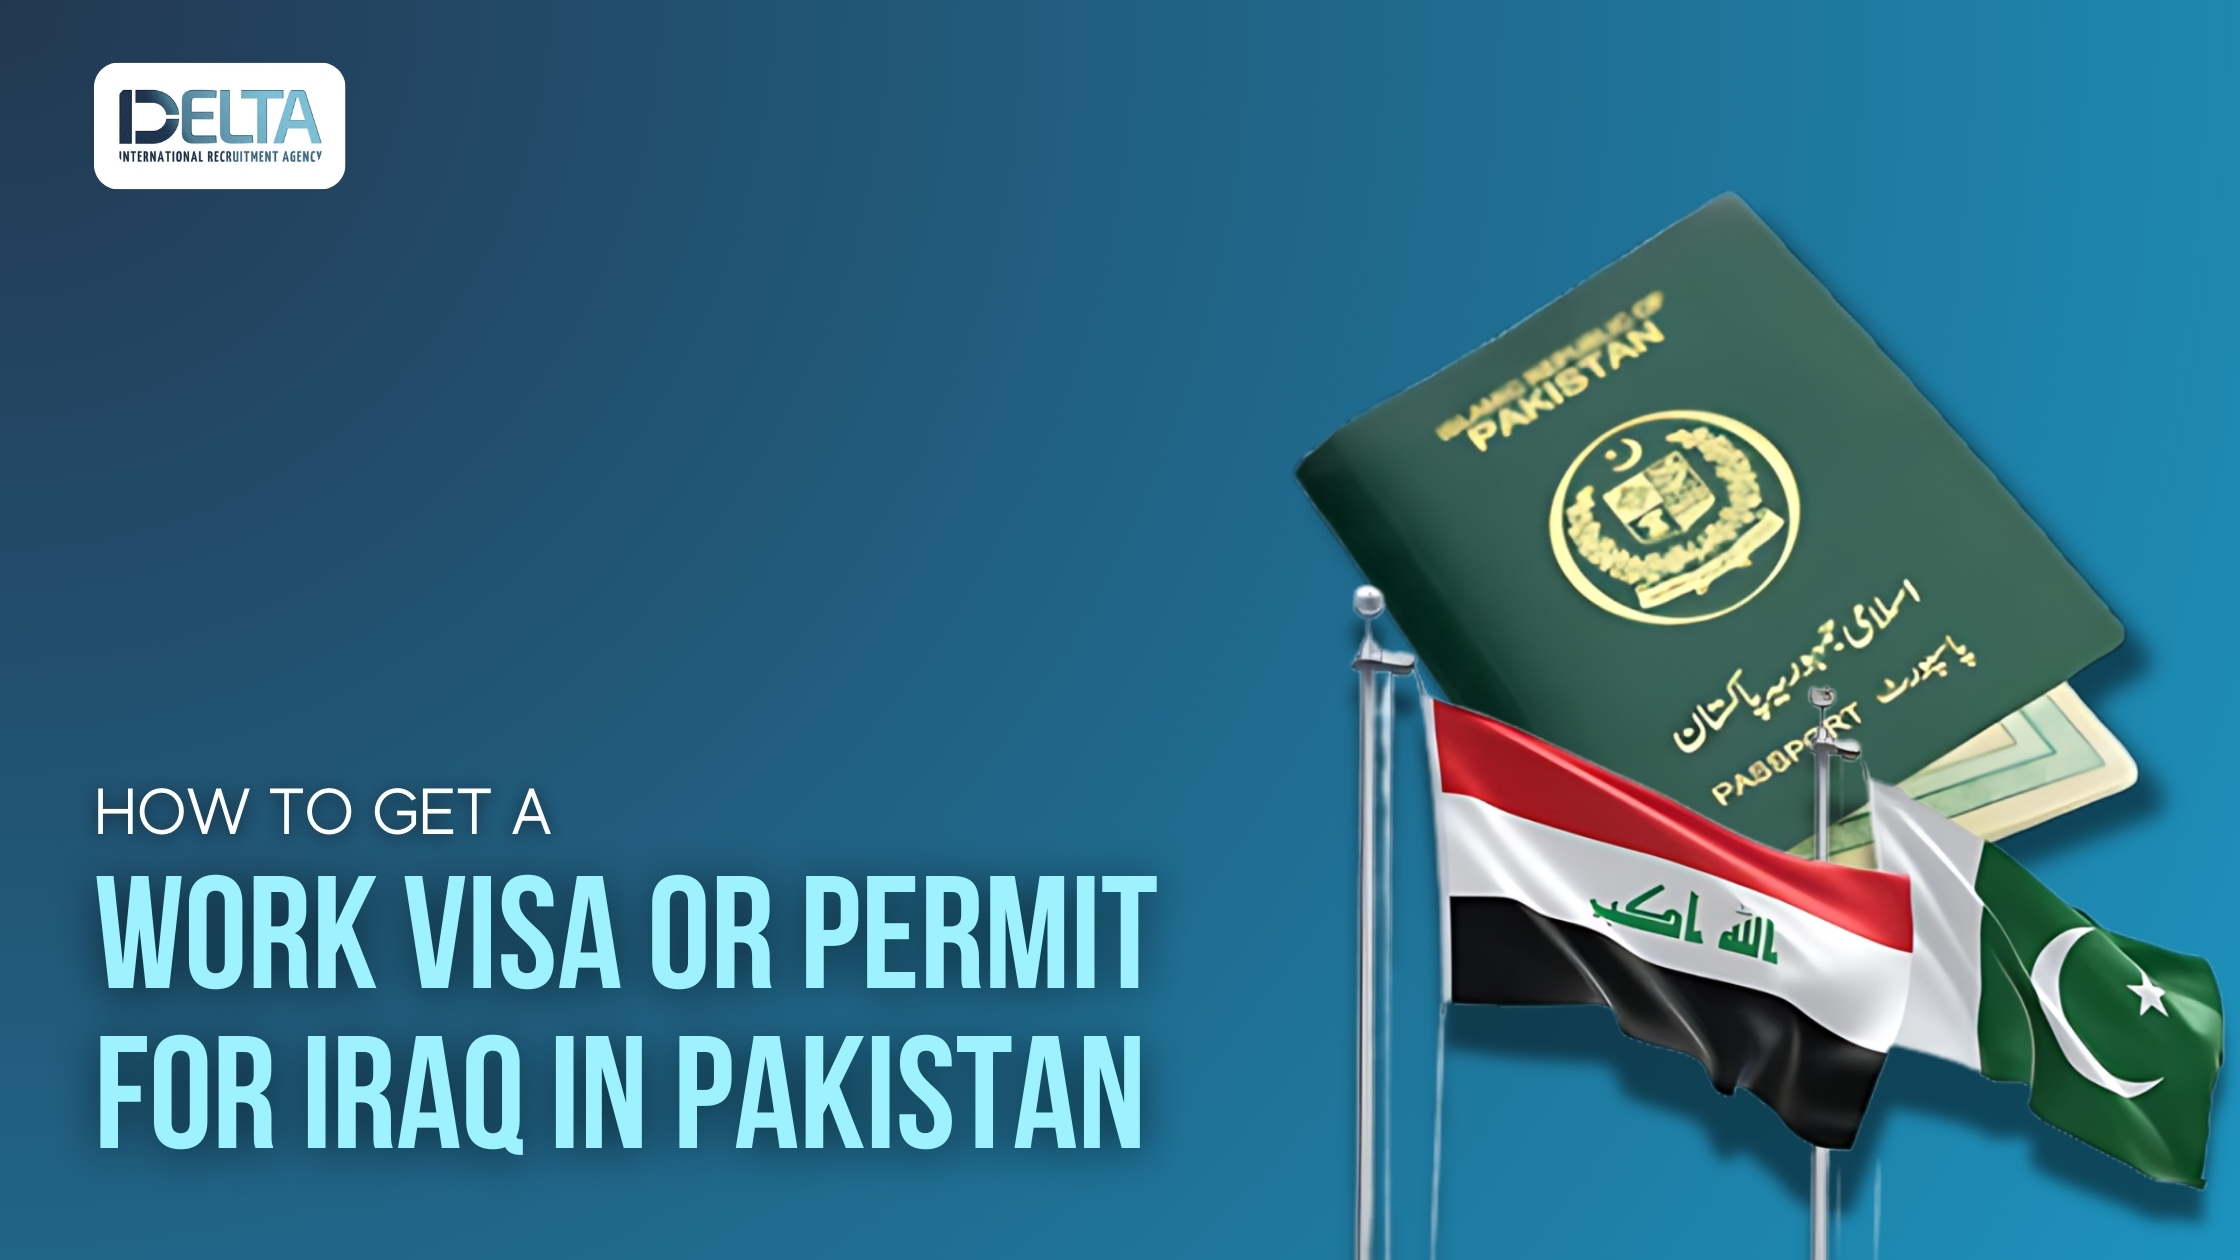 How to Get a Work Visa or Permit for Iraq in Pakistan